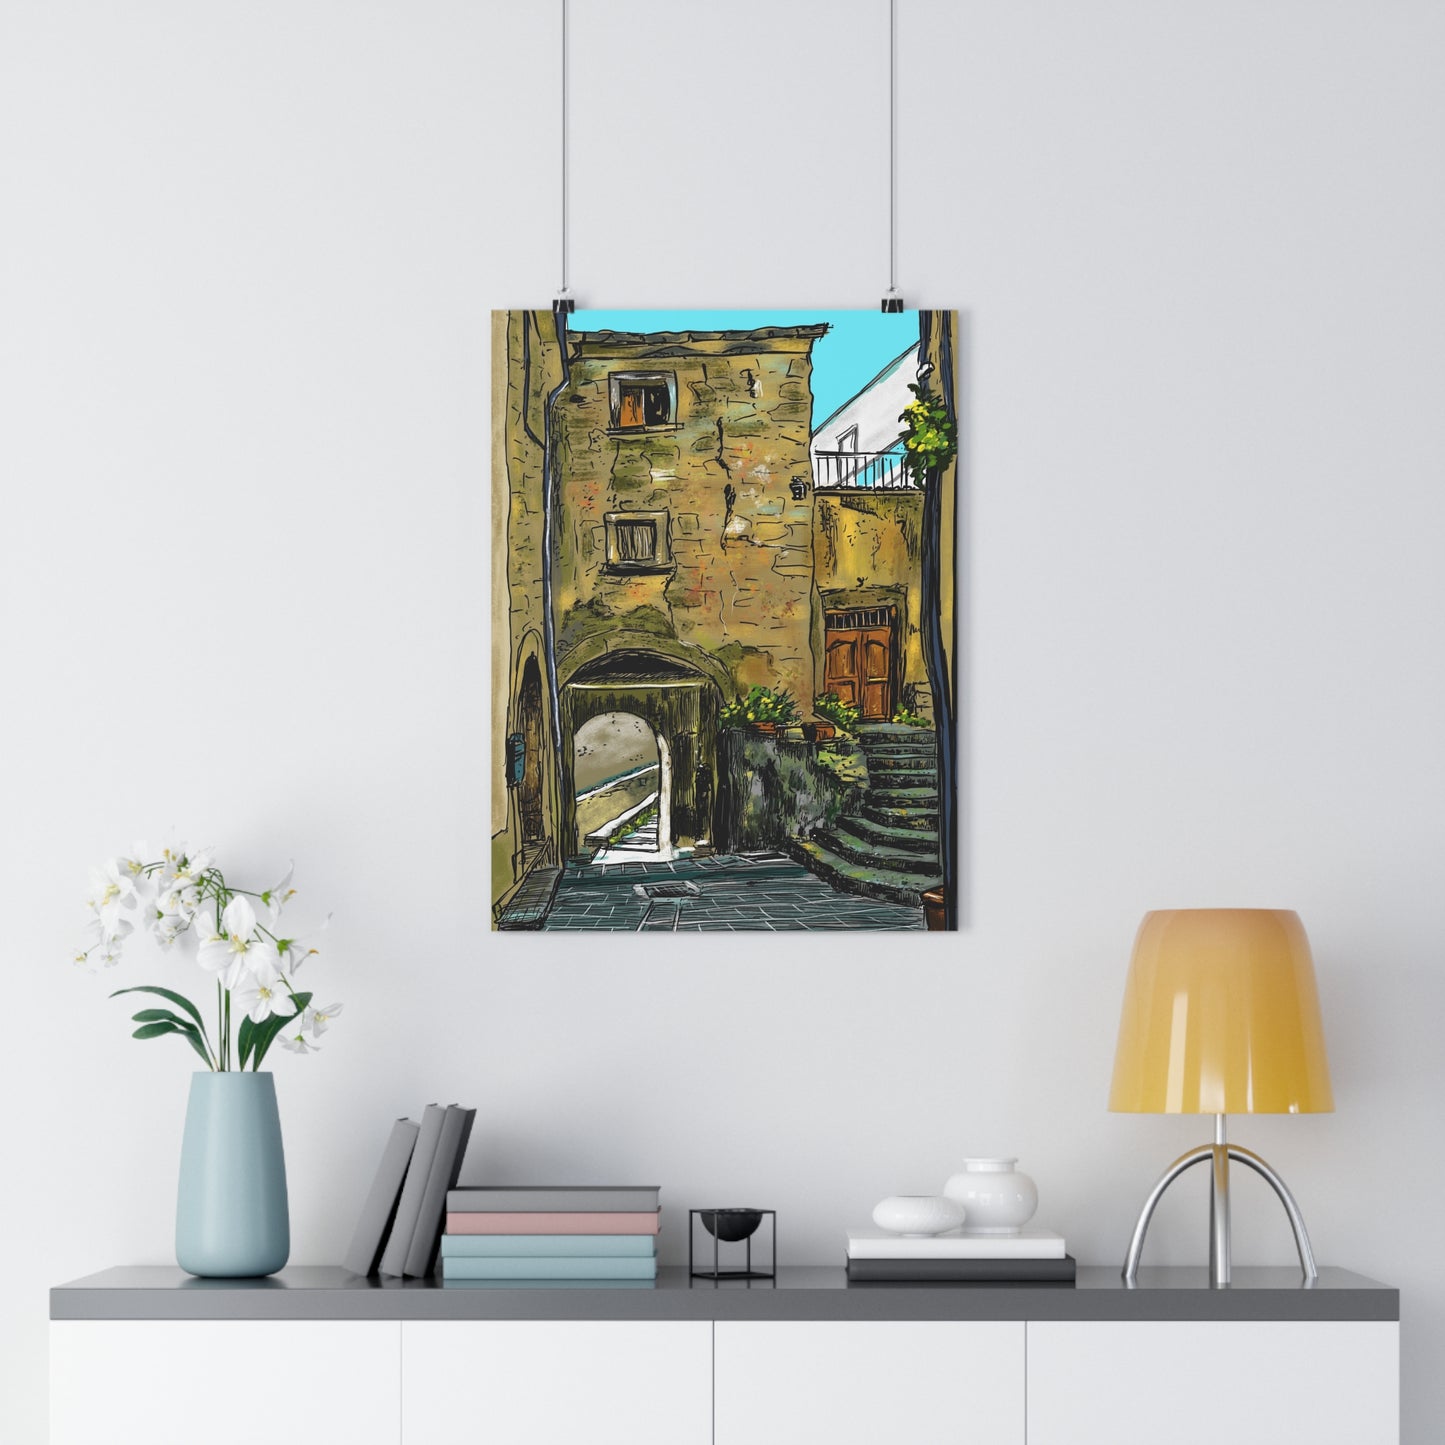 A Street in Bomba, Italy - Premium Poster